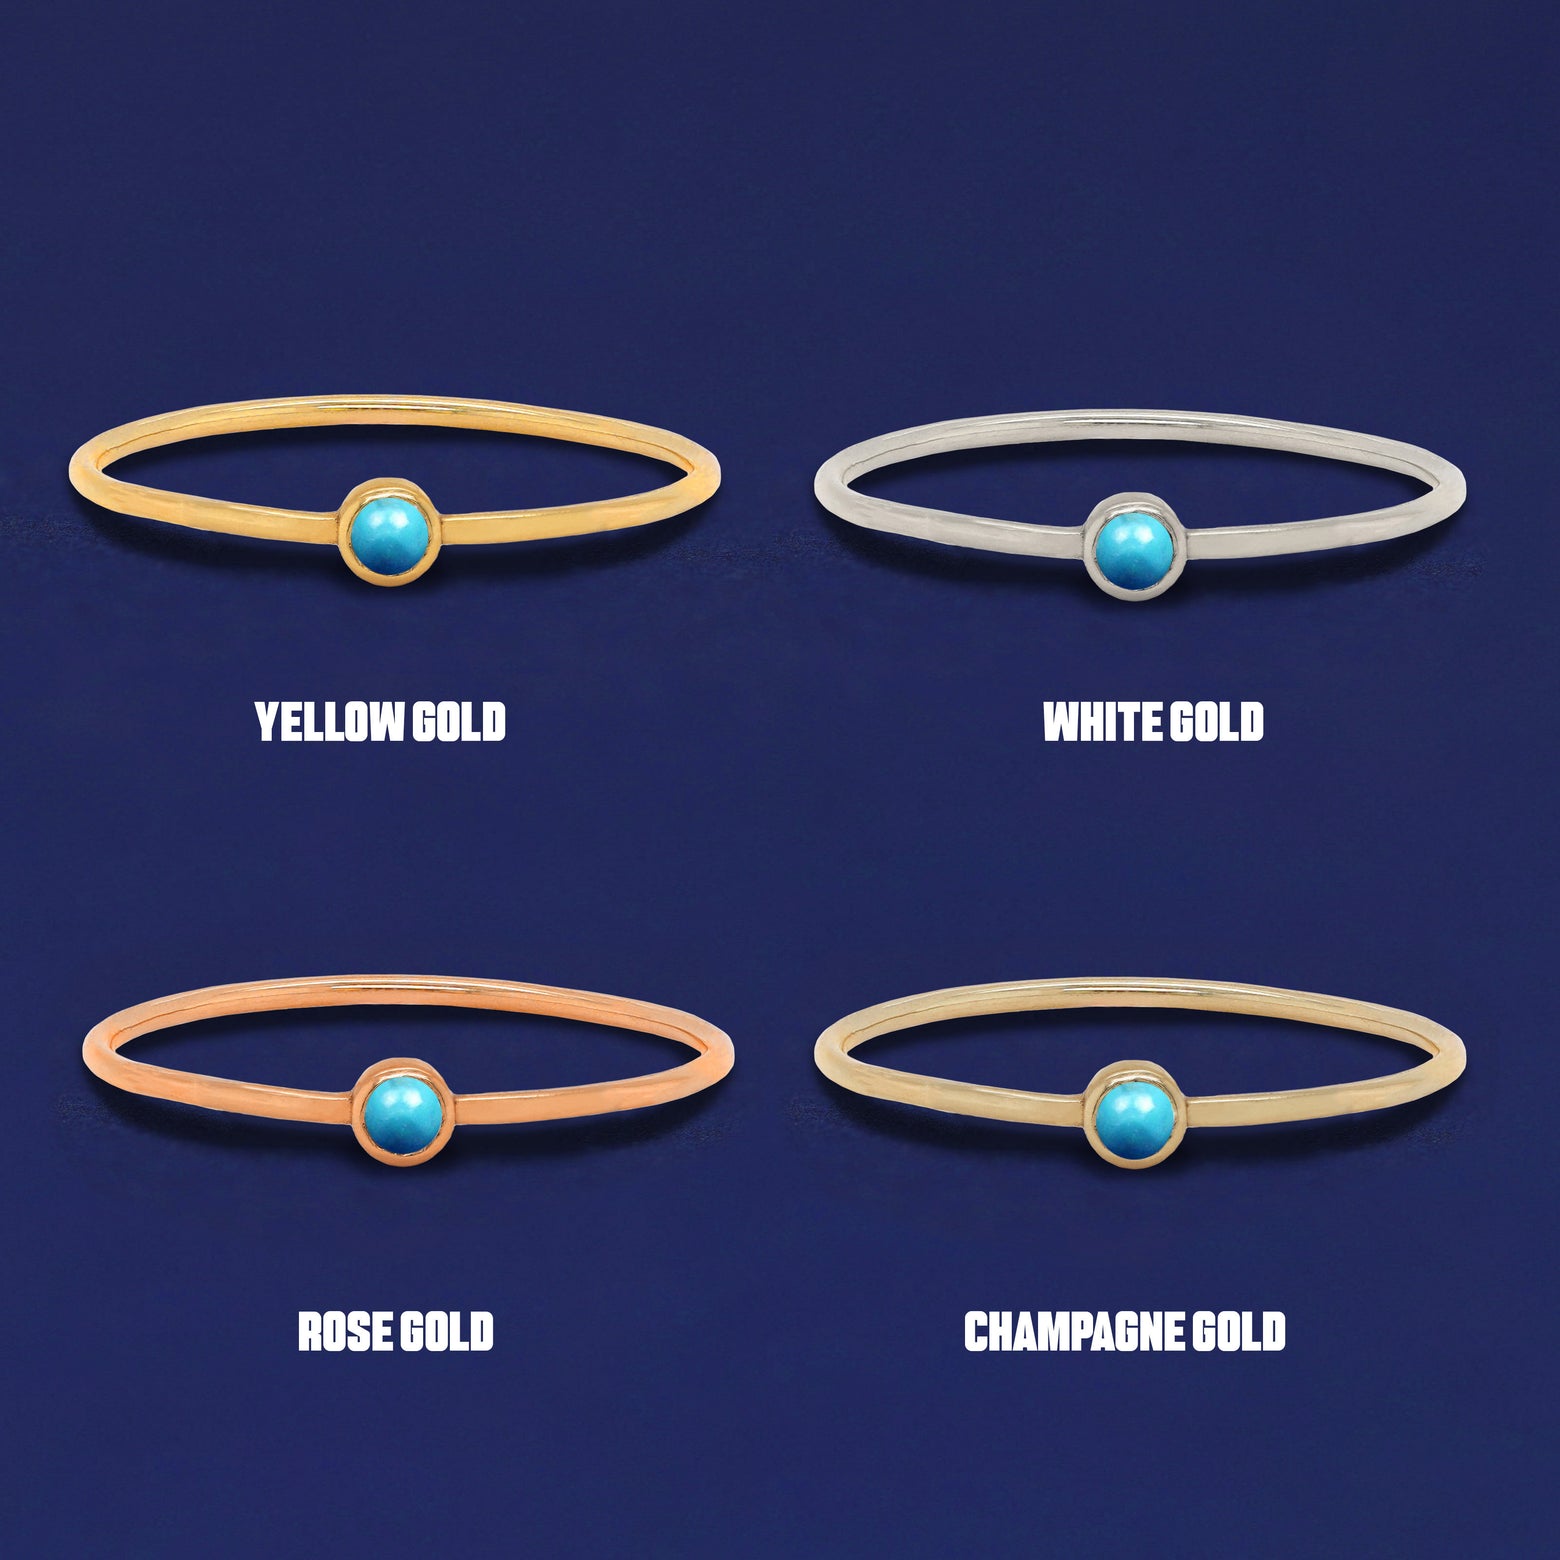 Four versions of the Turquoise Ring shown in options of yellow, white, rose and champagne gold